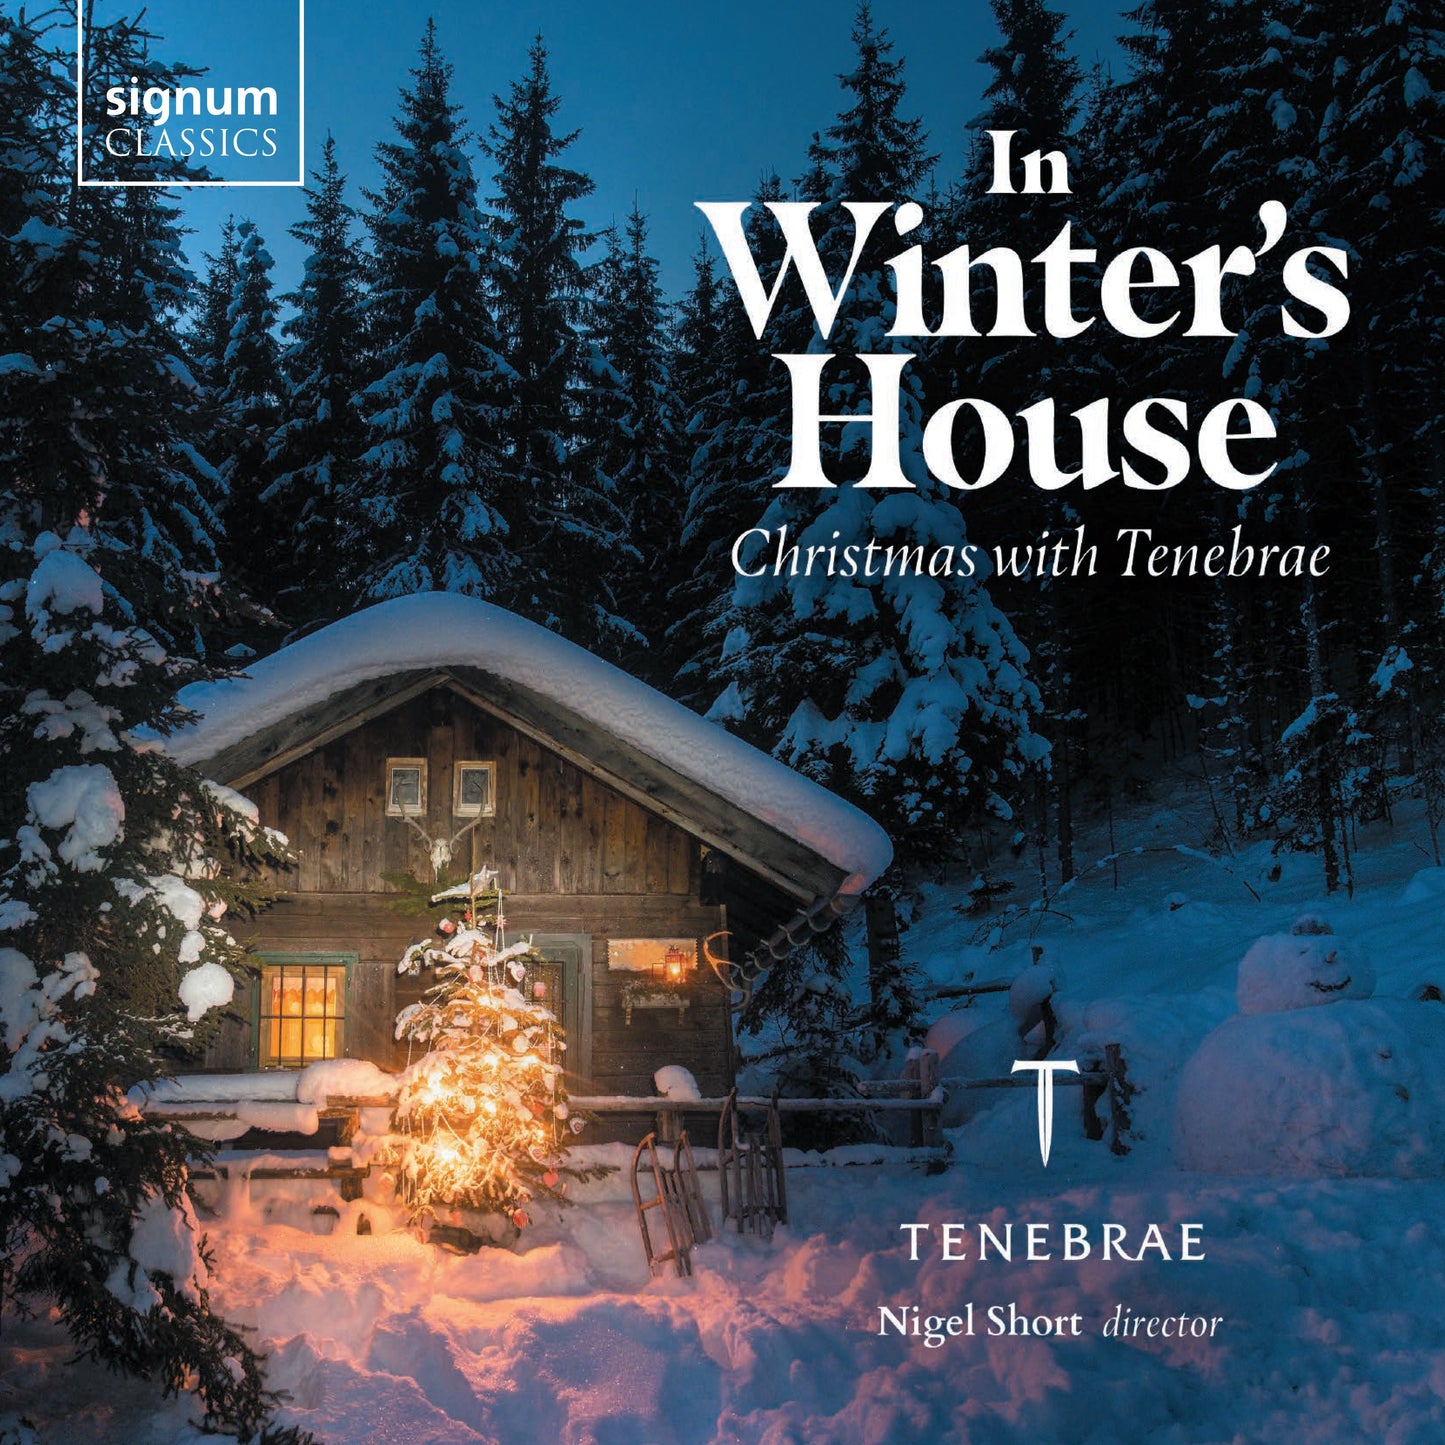 In Winter's House - Christmas with Tenebrae